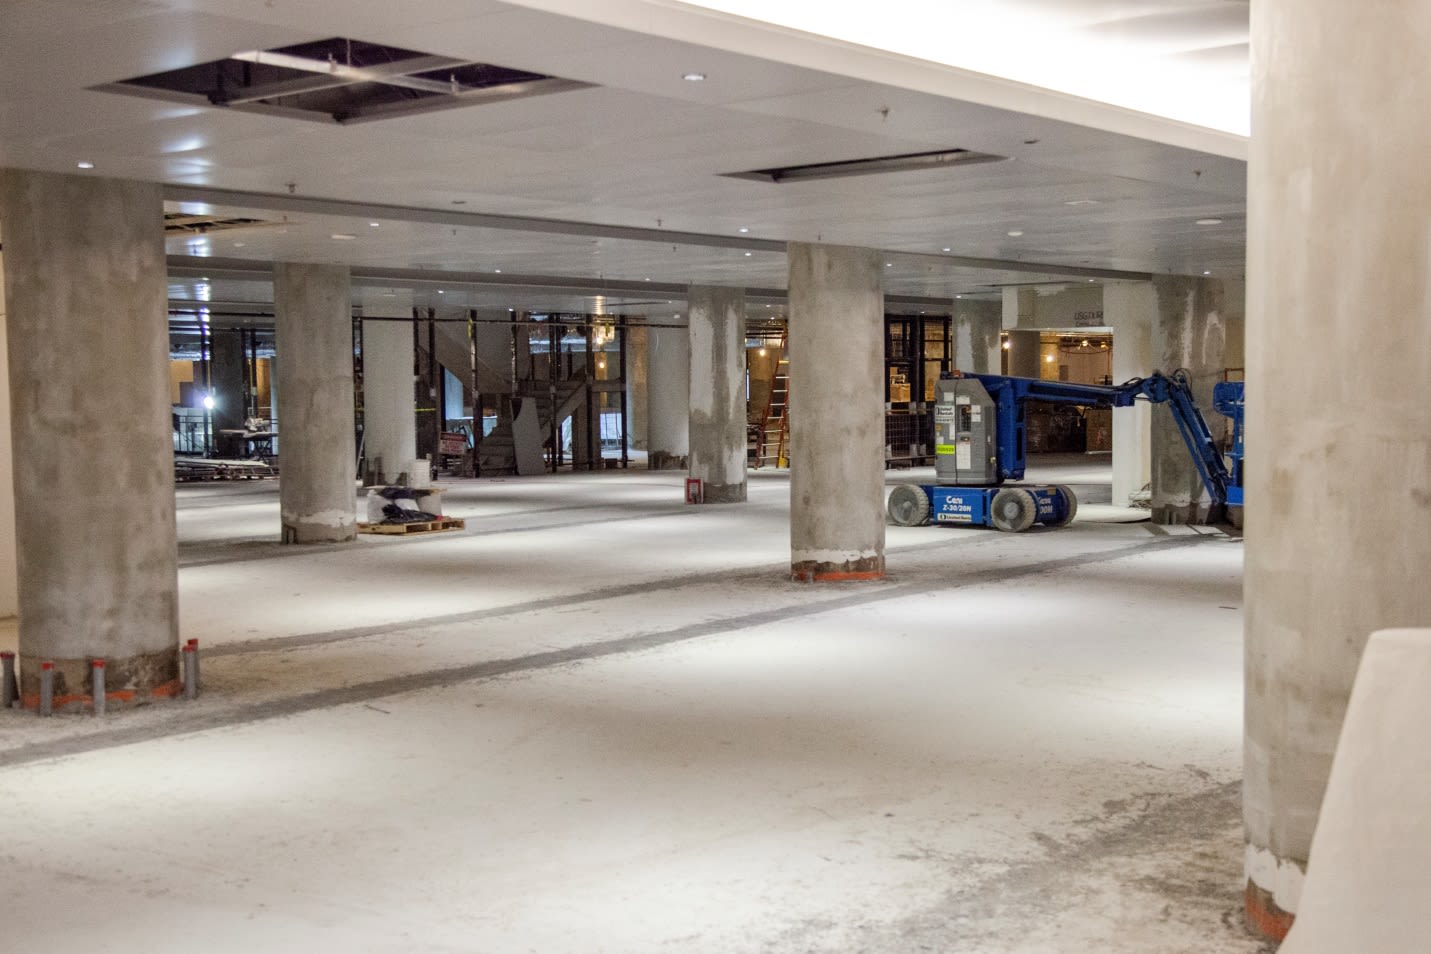 construction at bay concourse continues